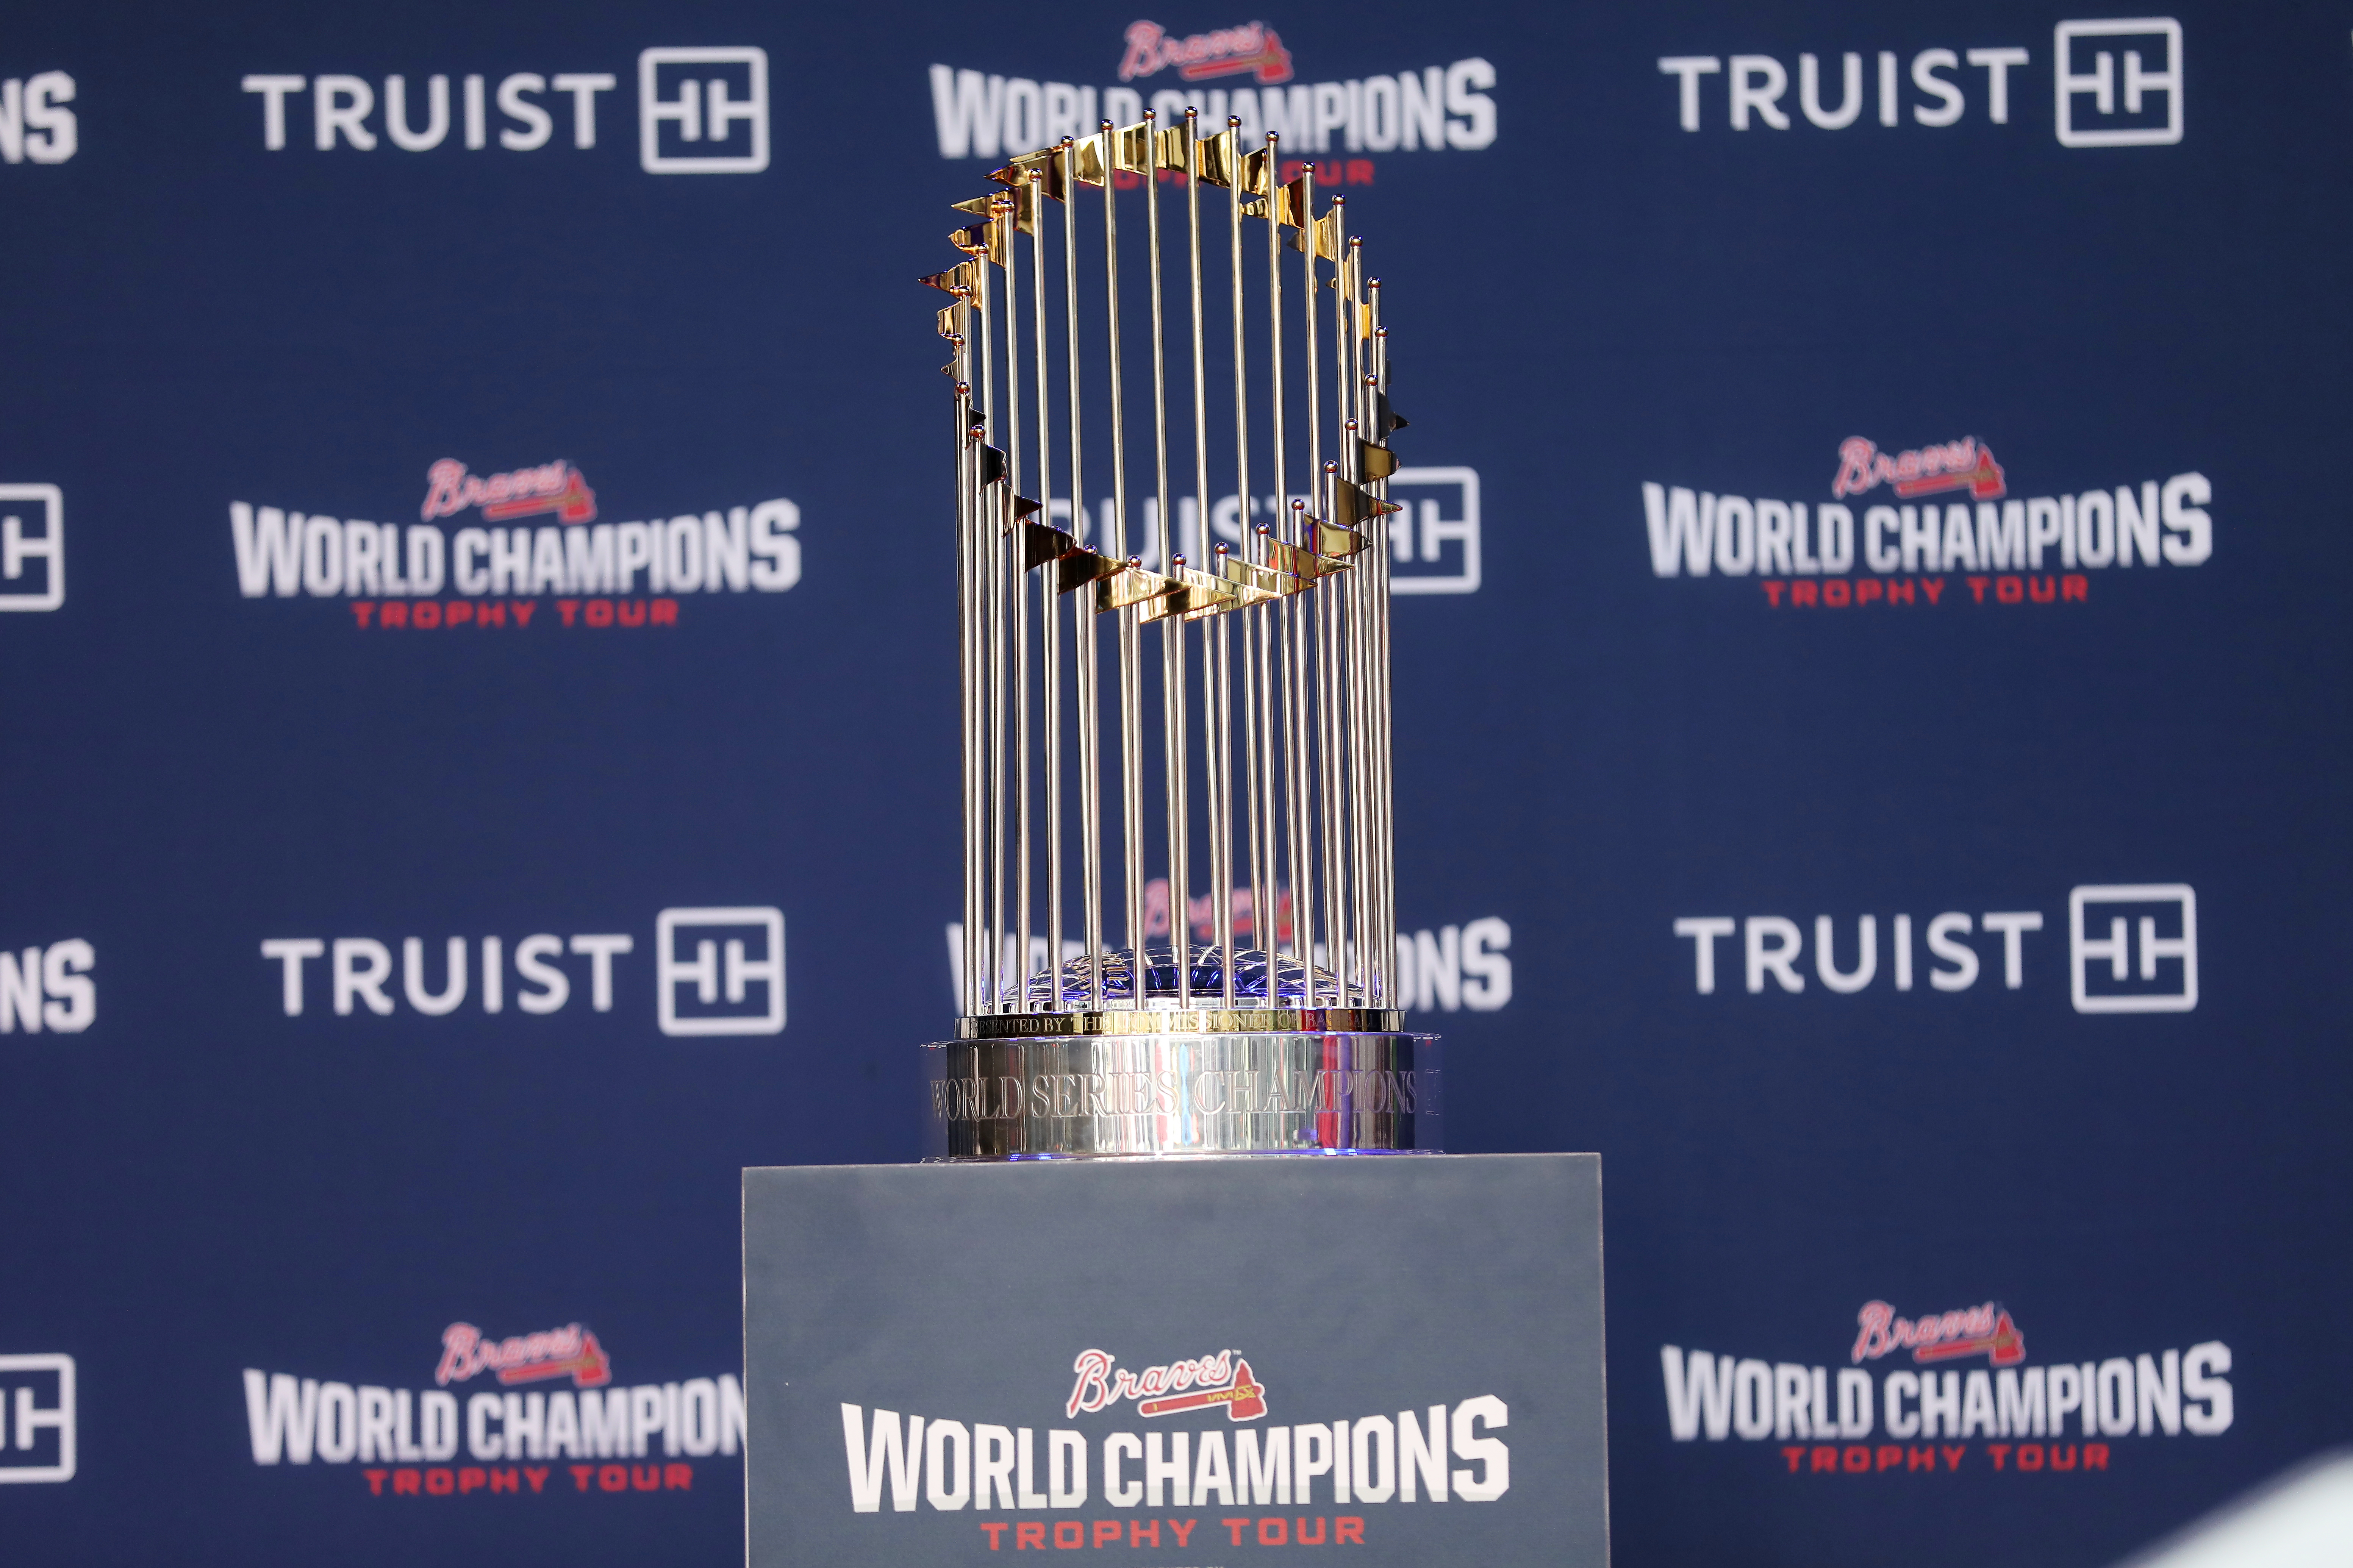 How to see Braves World Series trophy for free in Charlotte